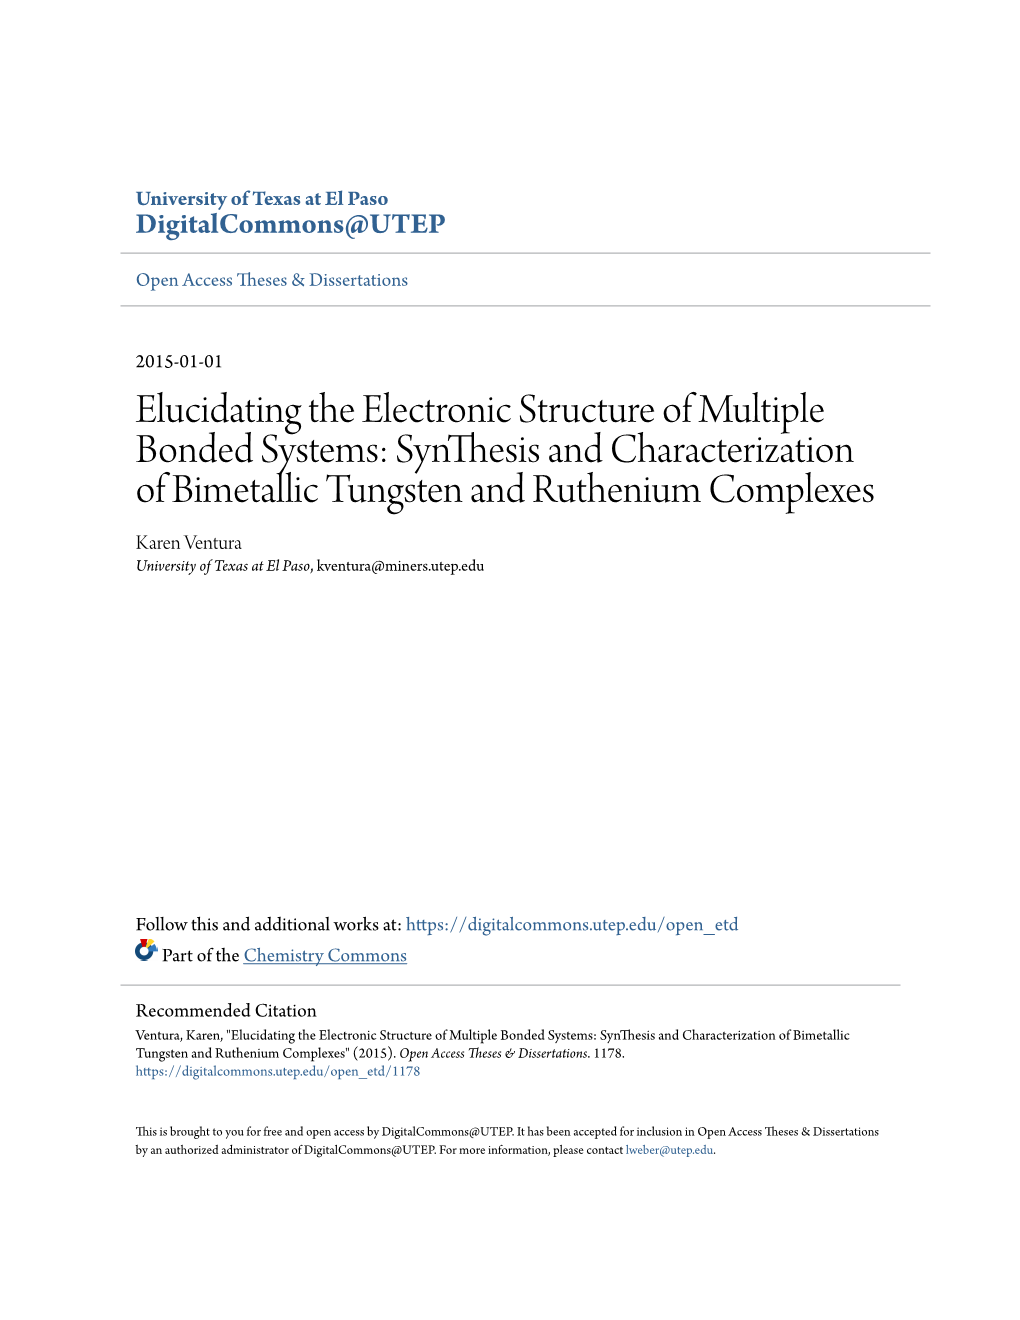 Elucidating the Electronic Structure of Multiple Bonded Systems